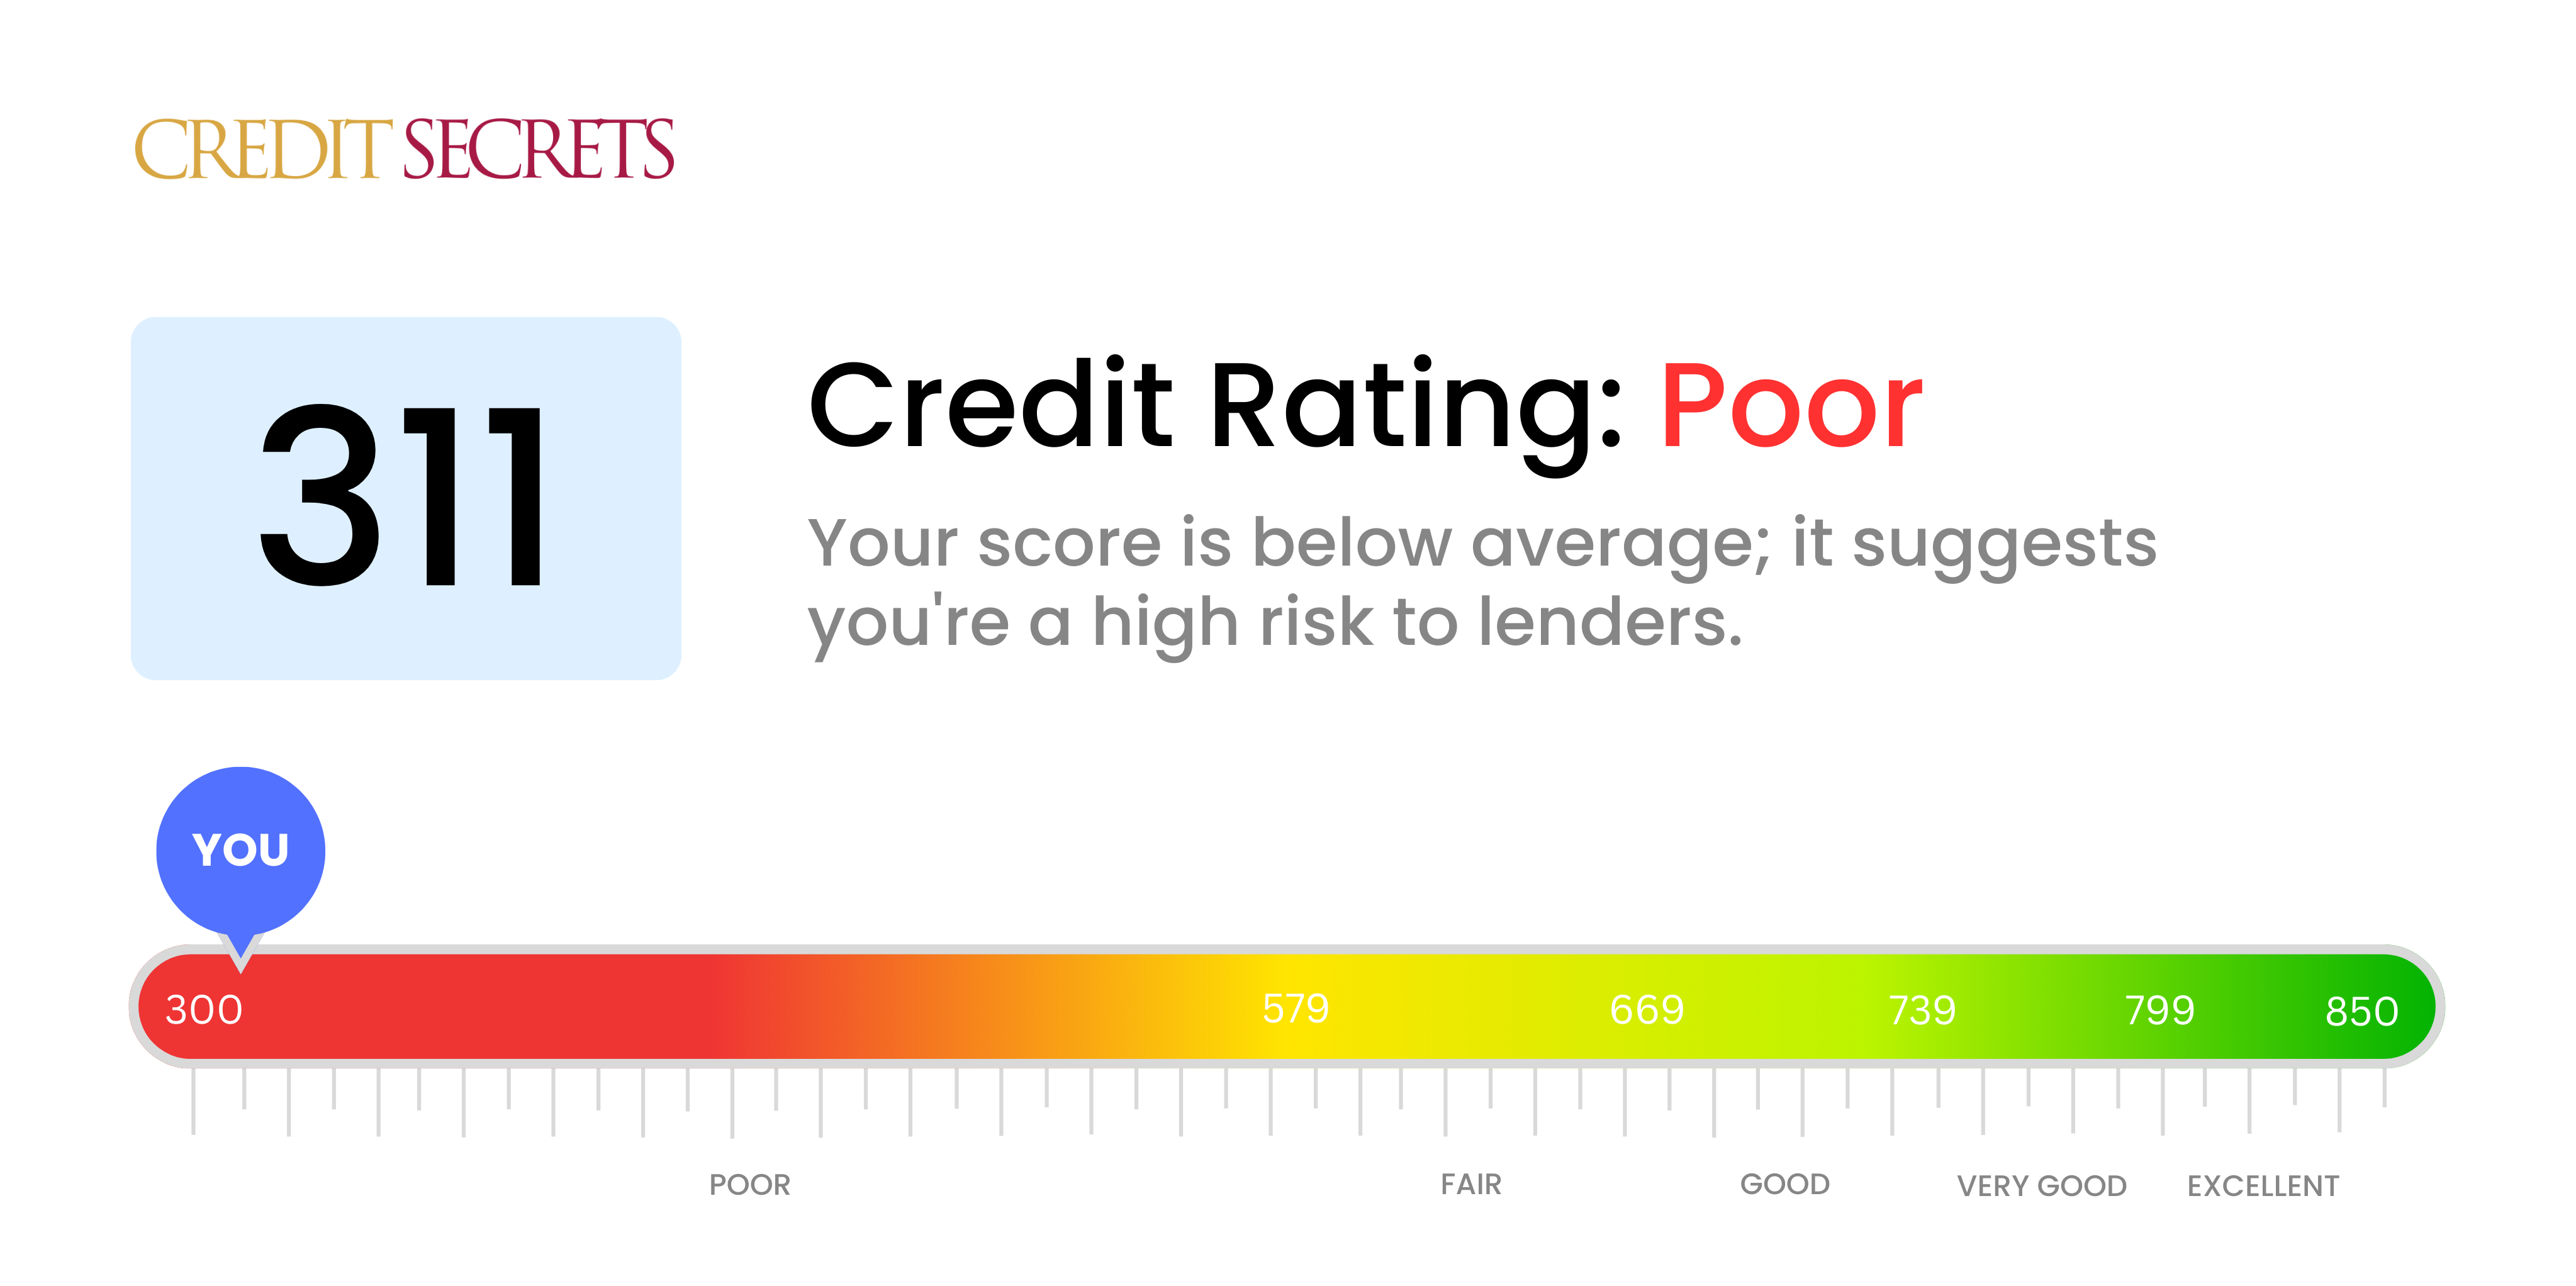 Is 311 a good credit score?